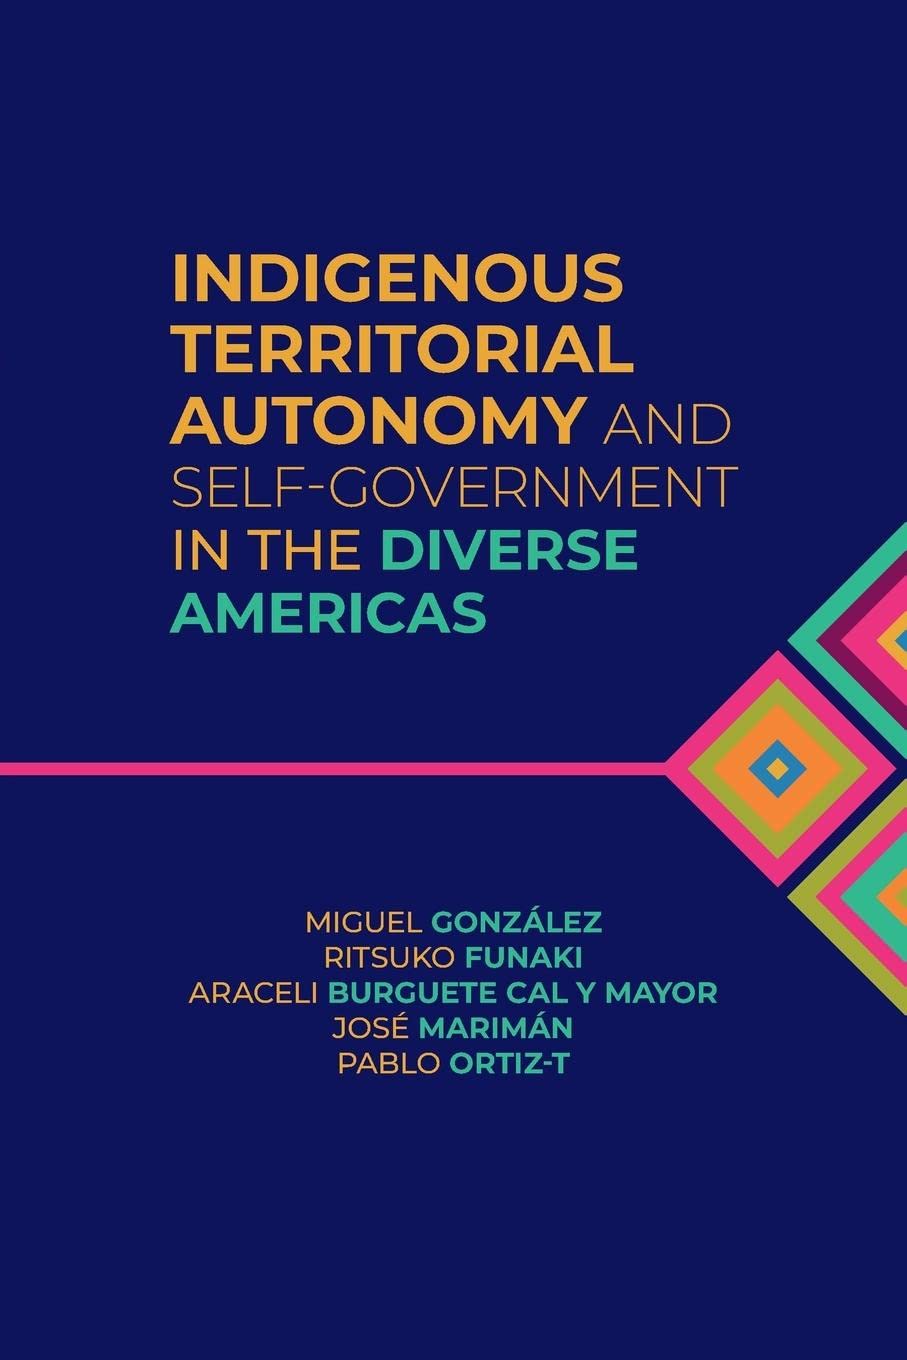 Indigenous Territorial Autonomy and Self-Government in the Diverse Americas edited by Miguel González et al.